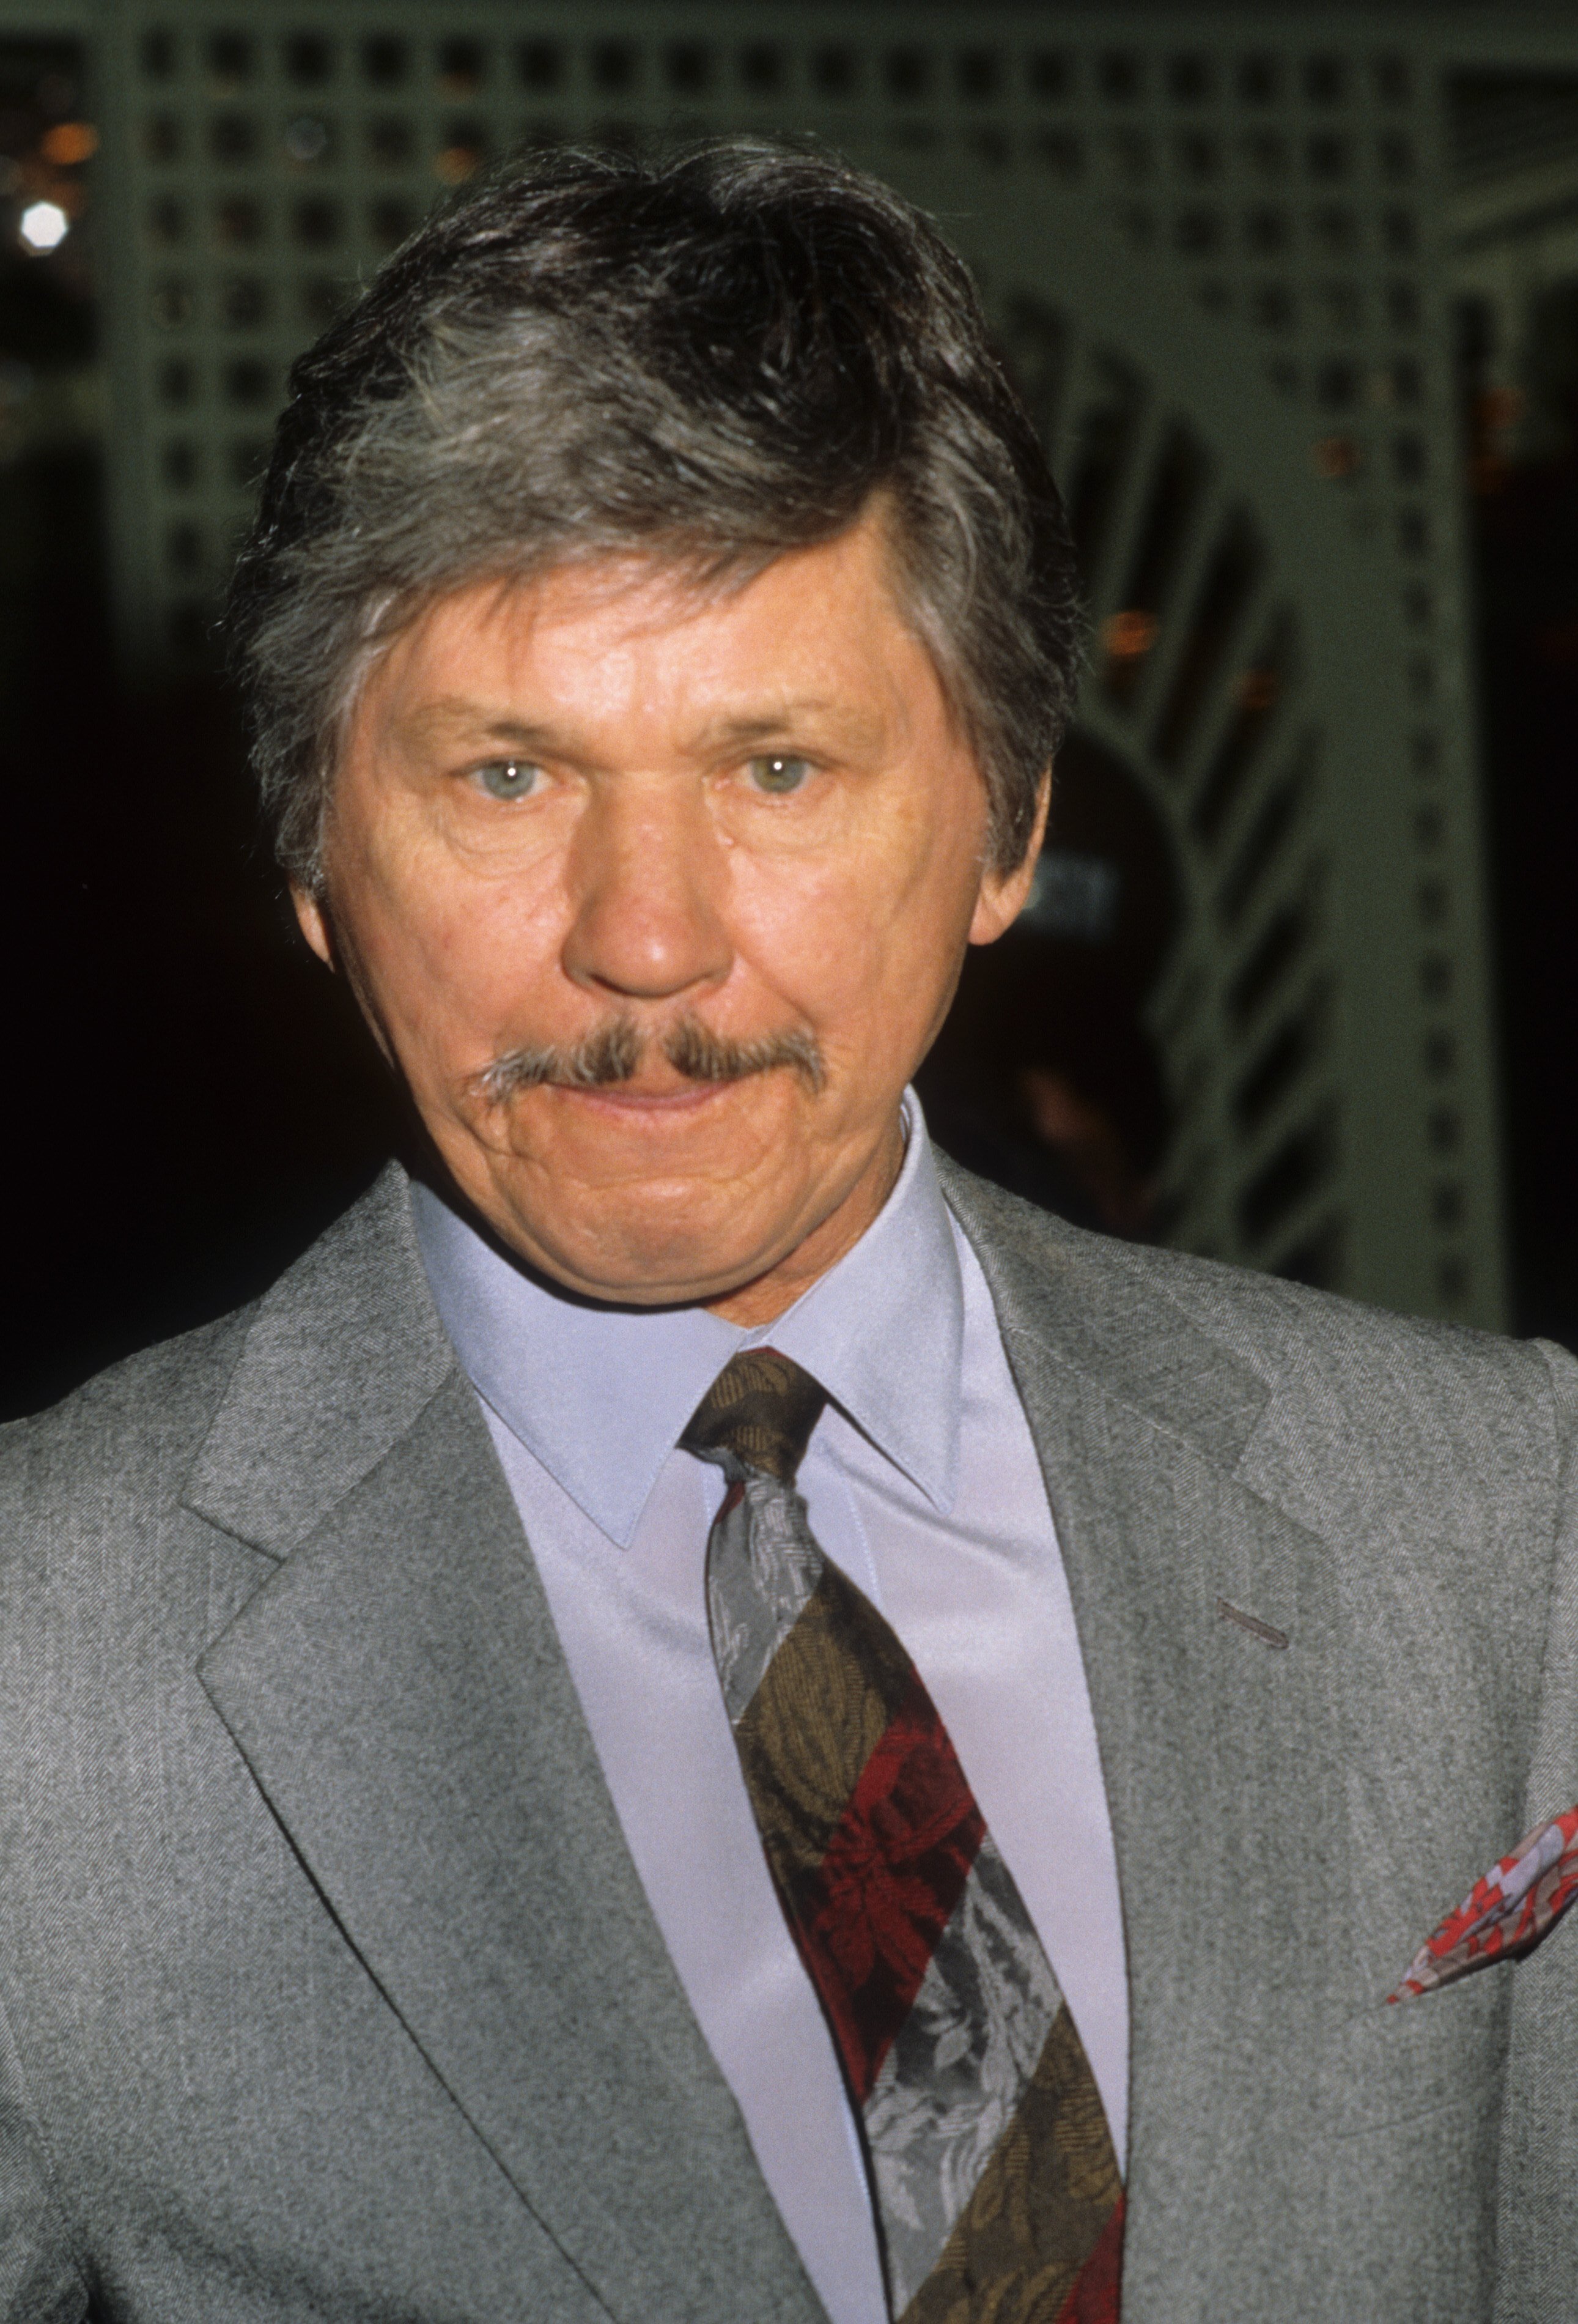 Charles Bronson posing for a portrait in 1985 in Los Angeles, California. / Source: Getty Images